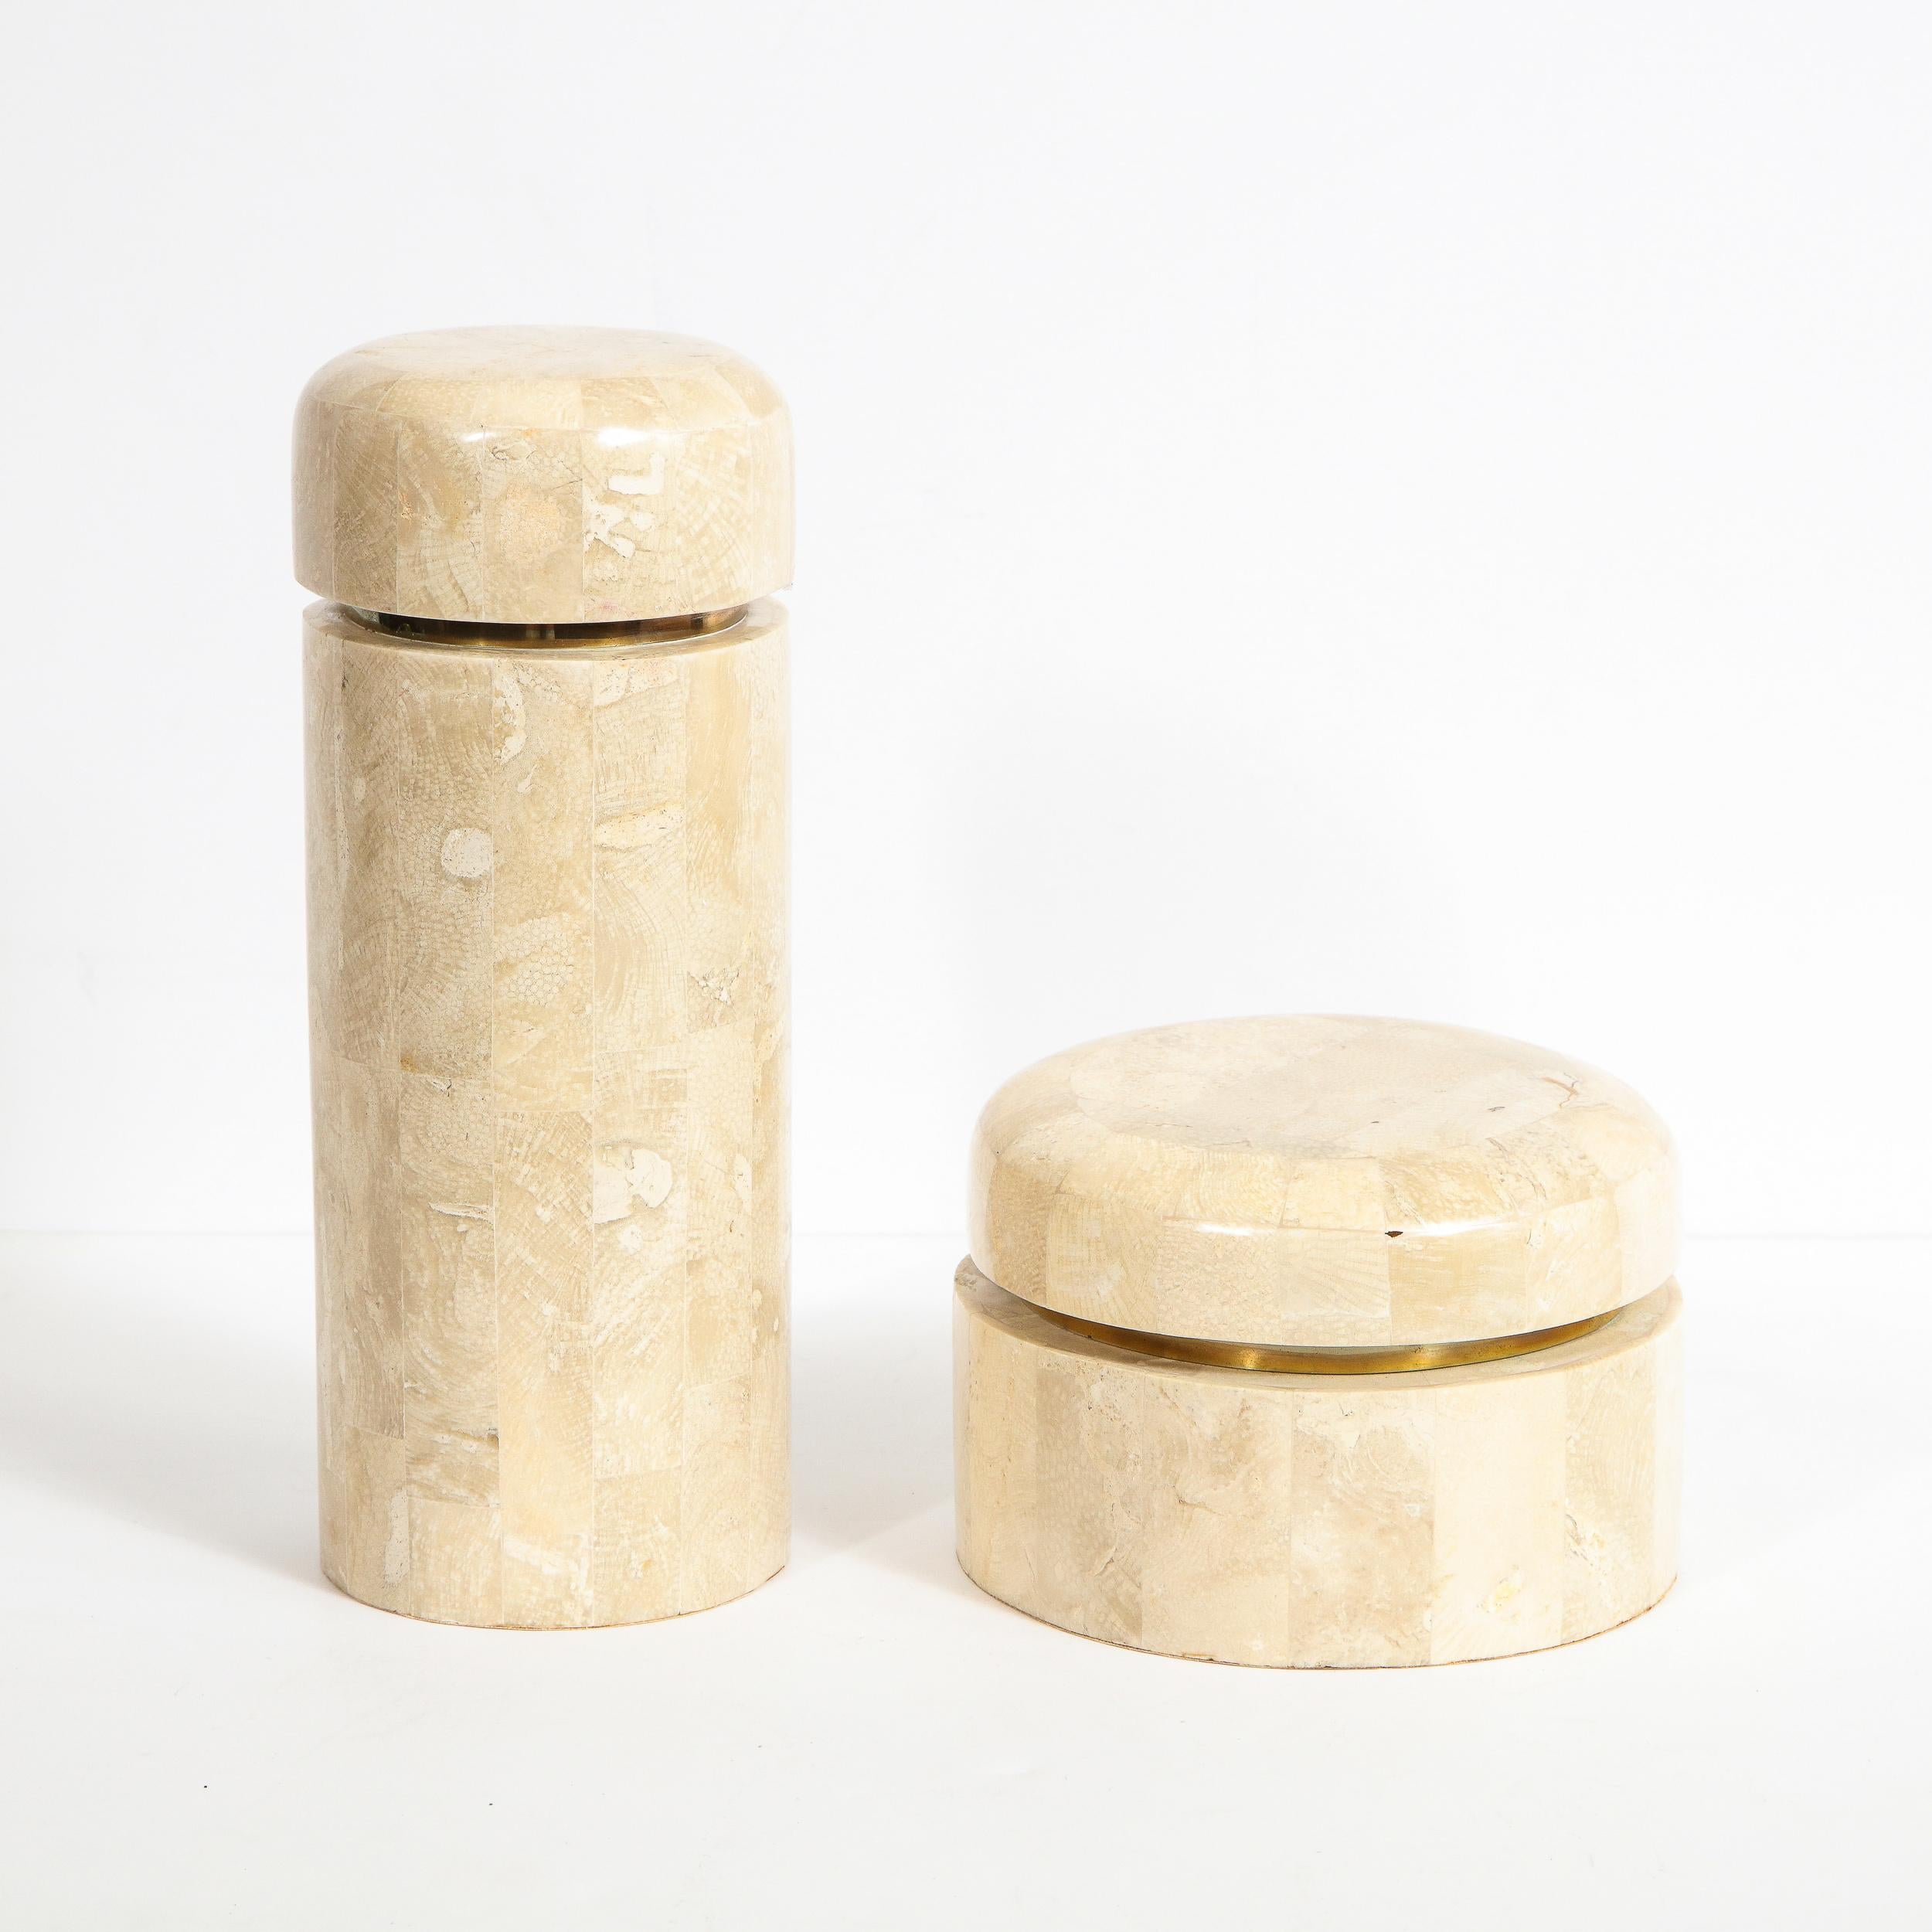 This elegant pair of modernist boxes were realized by the celebrated 20th century design firm Maitland Smith in the Philippines, circa 1980. They feature two cylindrical bodies- one shorter and larger in diameter, the other more slender and